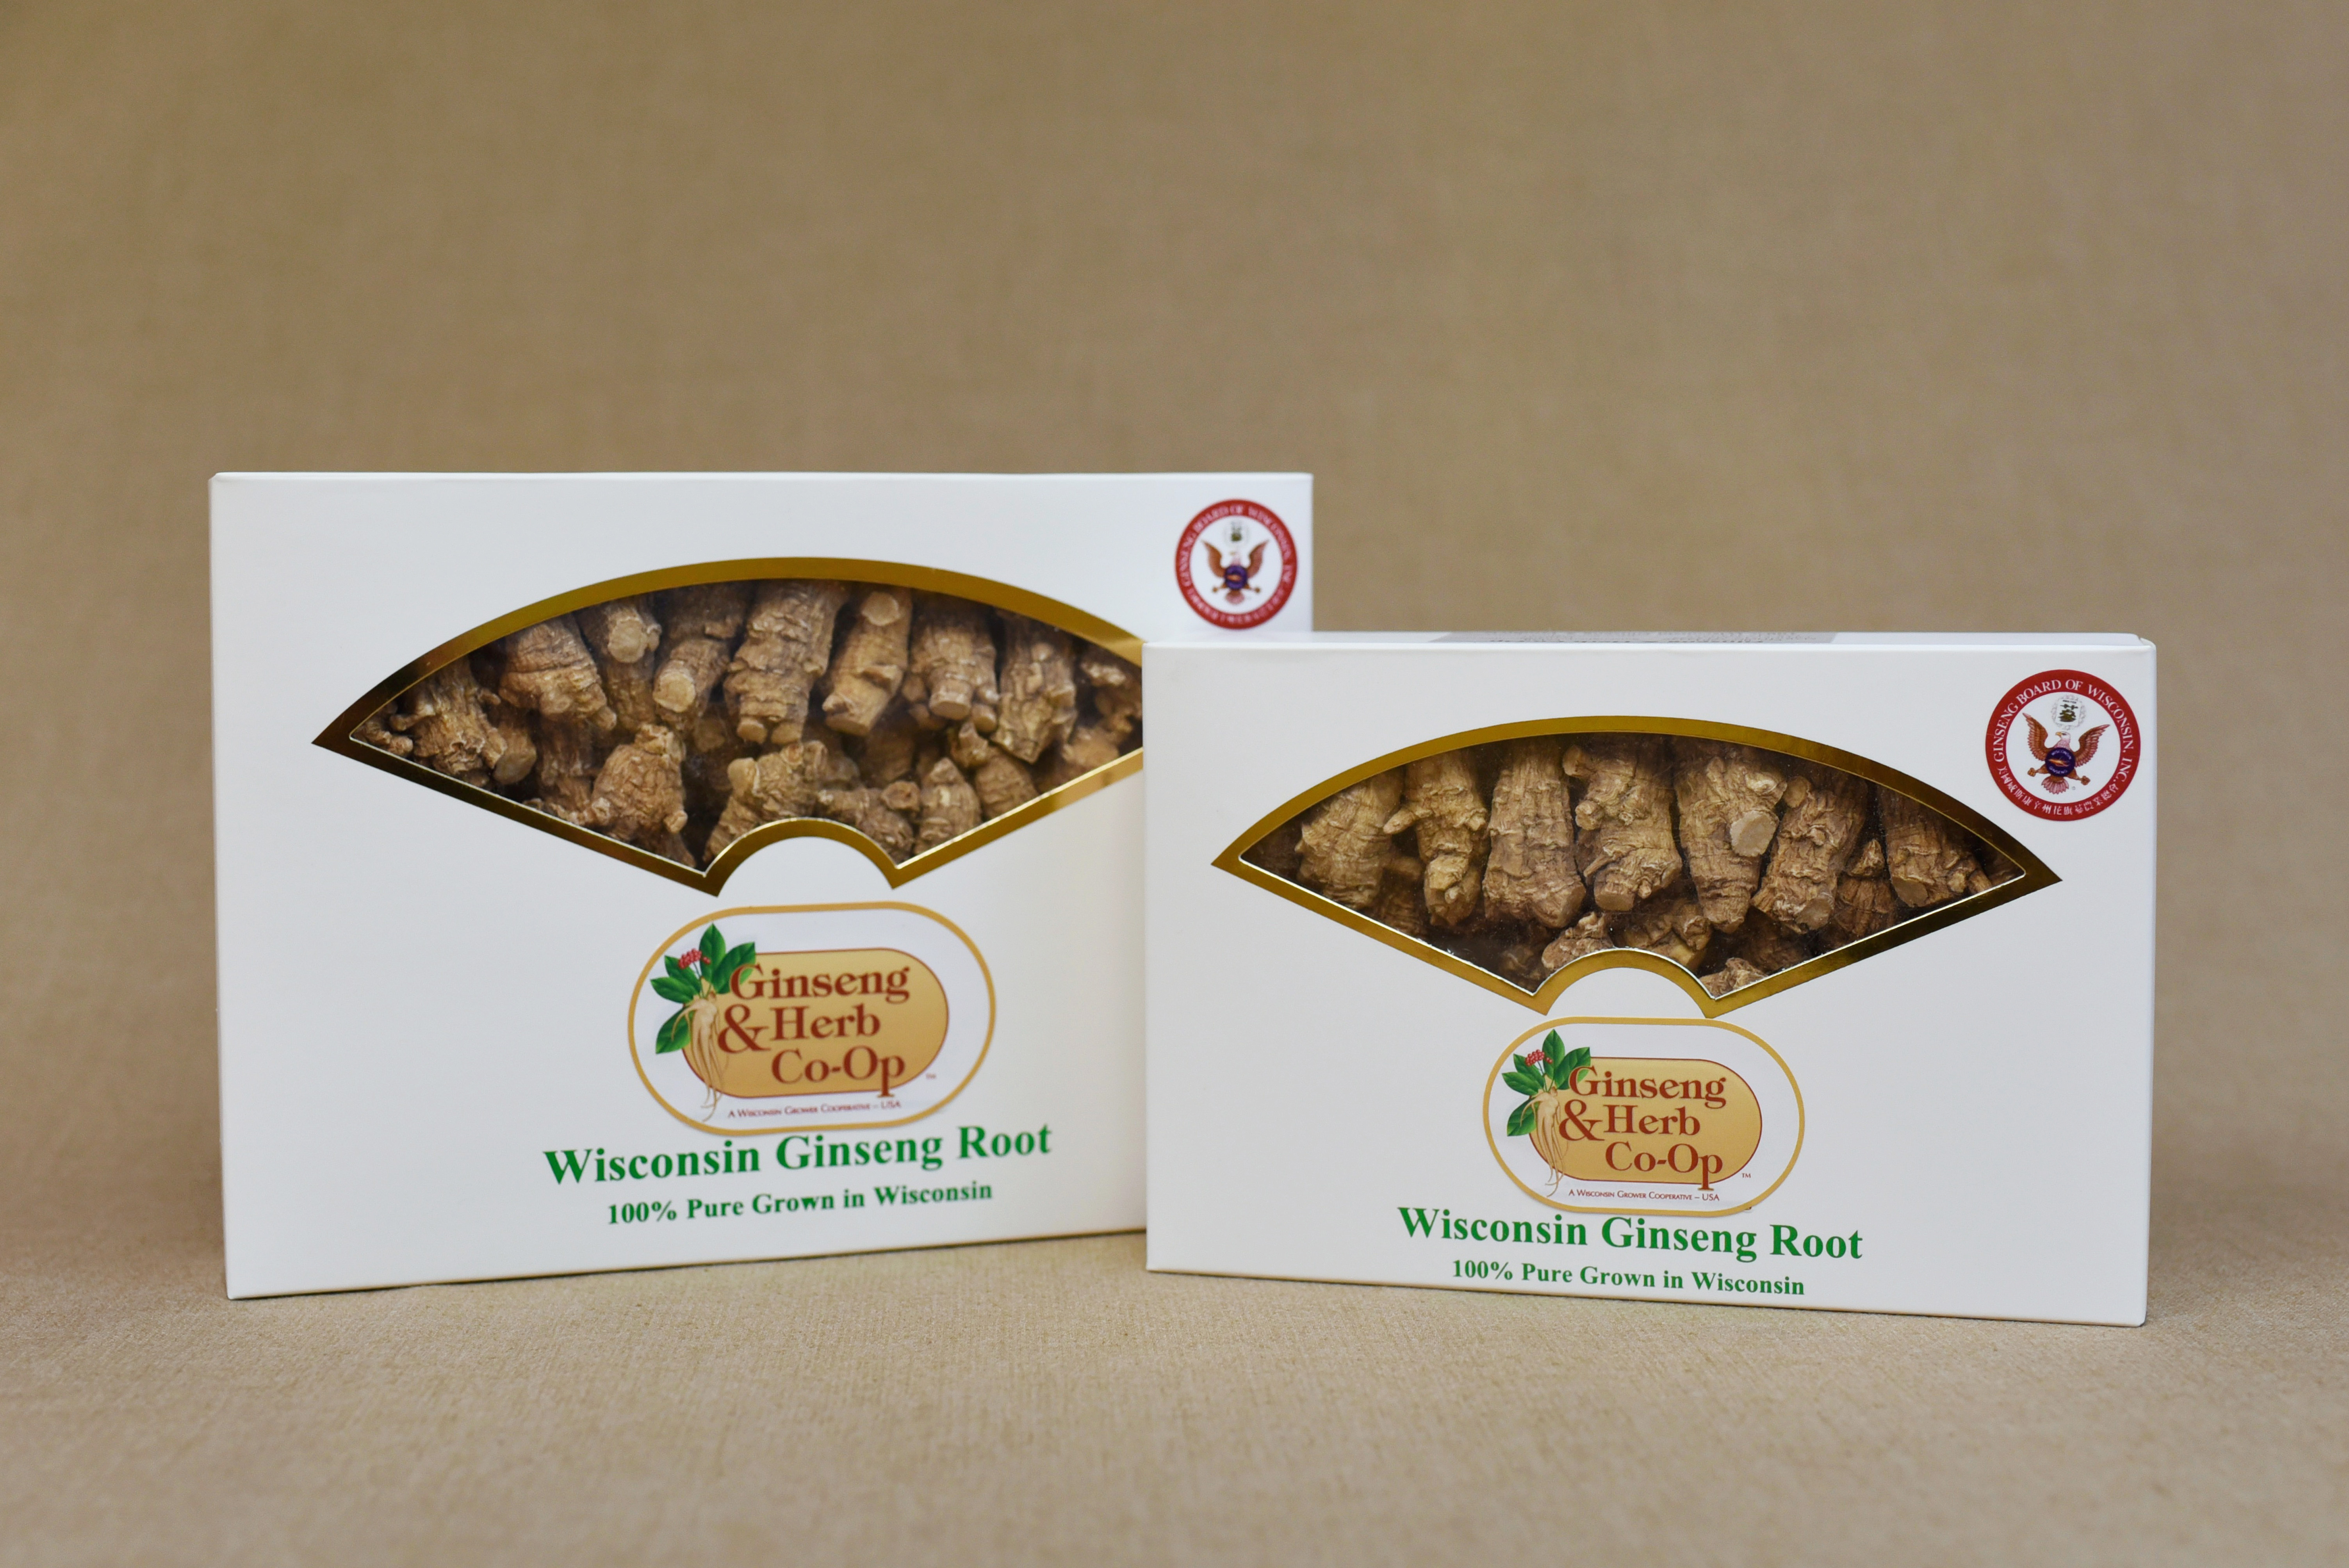 Buy Now! high quality Wisconsin Ginseng roots in Madison, WI